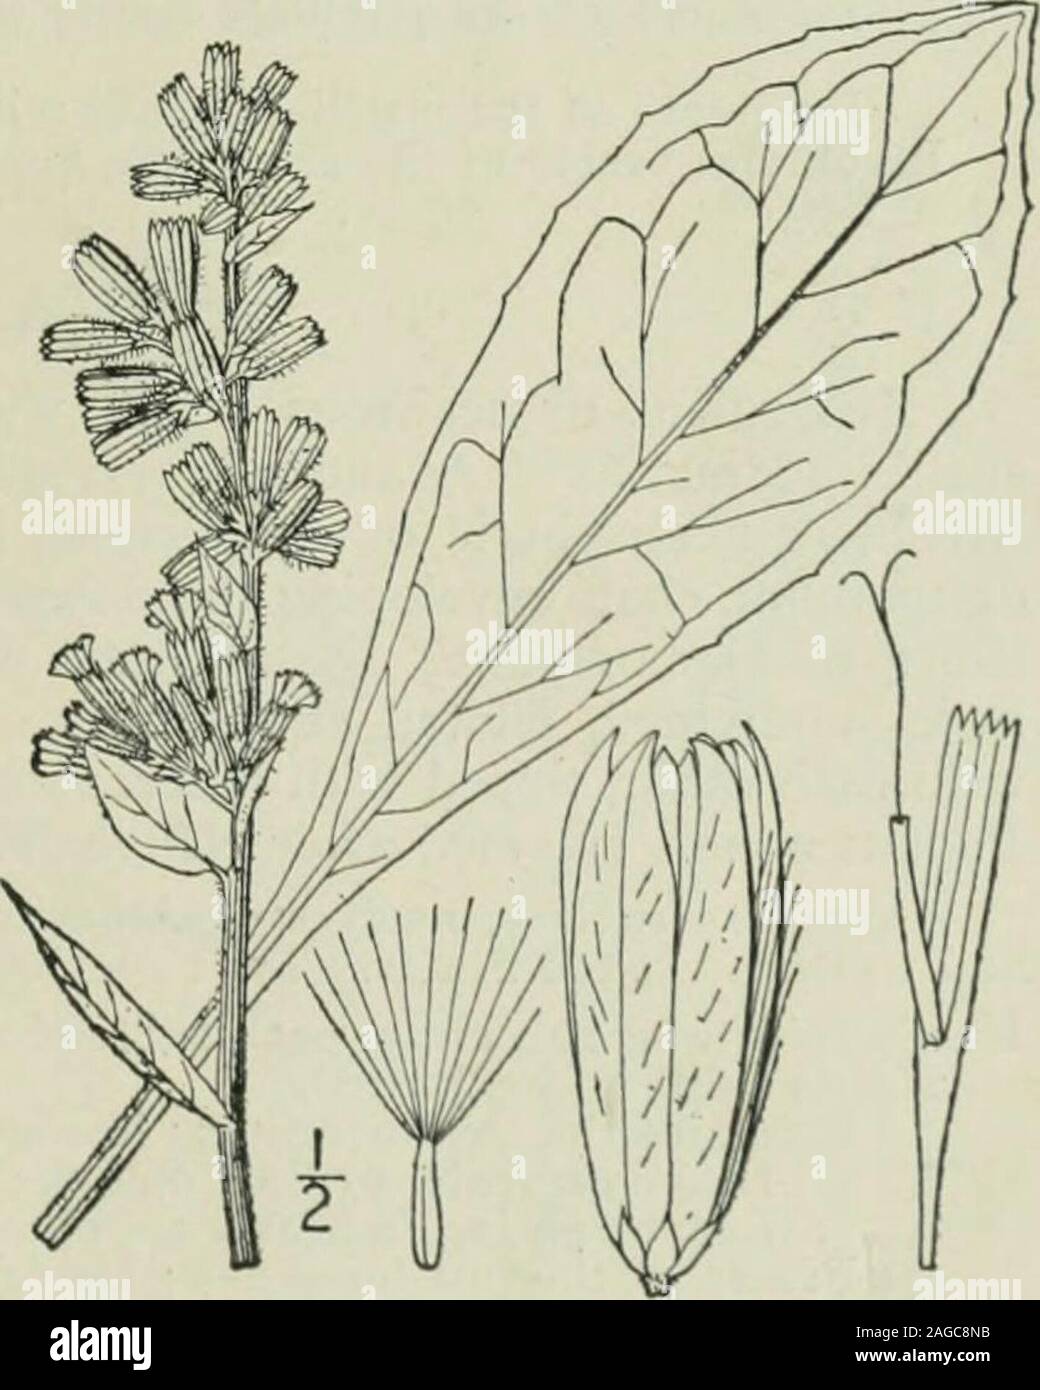 . An illustrated flora of the northern United States, Canada and the British possessions : from Newfoundland to the parallel of the southern boundary of Virginia and from the Atlantic Ocean westward to the 102nd meridian. r stout, glabrous and somewhatglaucous; stem striate, 2°-6° high. Leaves thickish,glabrous and glaucous, the lower and basal ones oval,oblong, oblanceolate, or obovate, dentate, denticulate,pinnatifid or pinnately lobed, 4-8 long, mostly ob-tuse, tapering into long margined petioles; upperleaves sessile, smaller and partly clasping, lanceo-late to ovate-lanceolate, denticulat Stock Photo